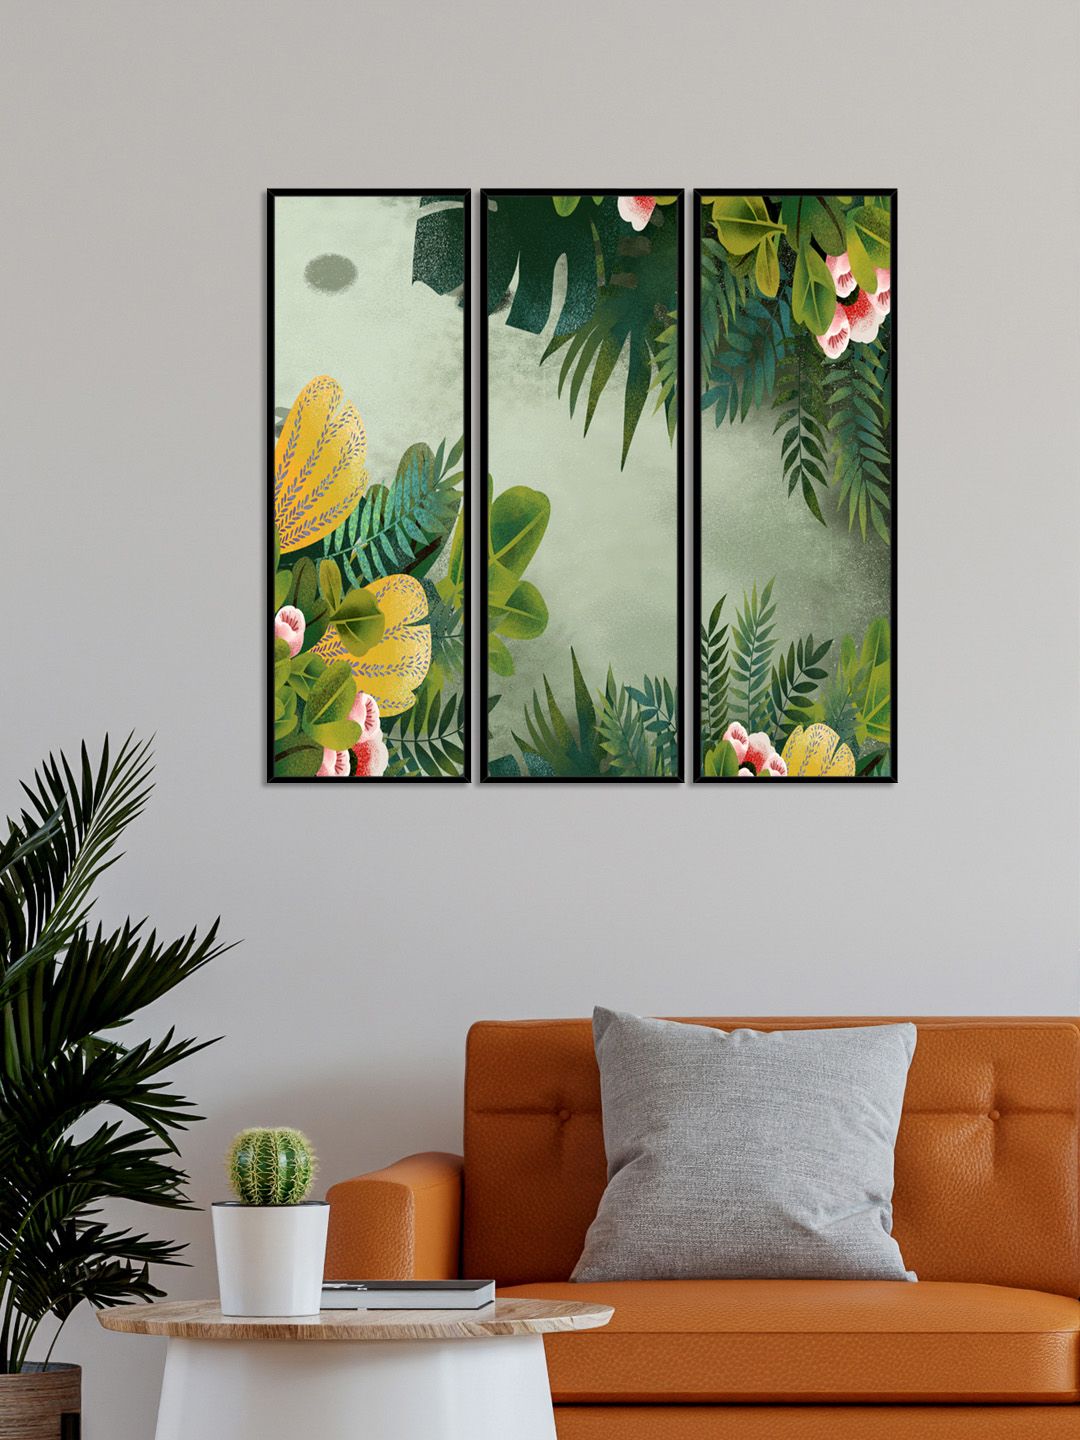 999Store Set Of 3 Blooming Flower Framed Wall Art Paintings Price in India